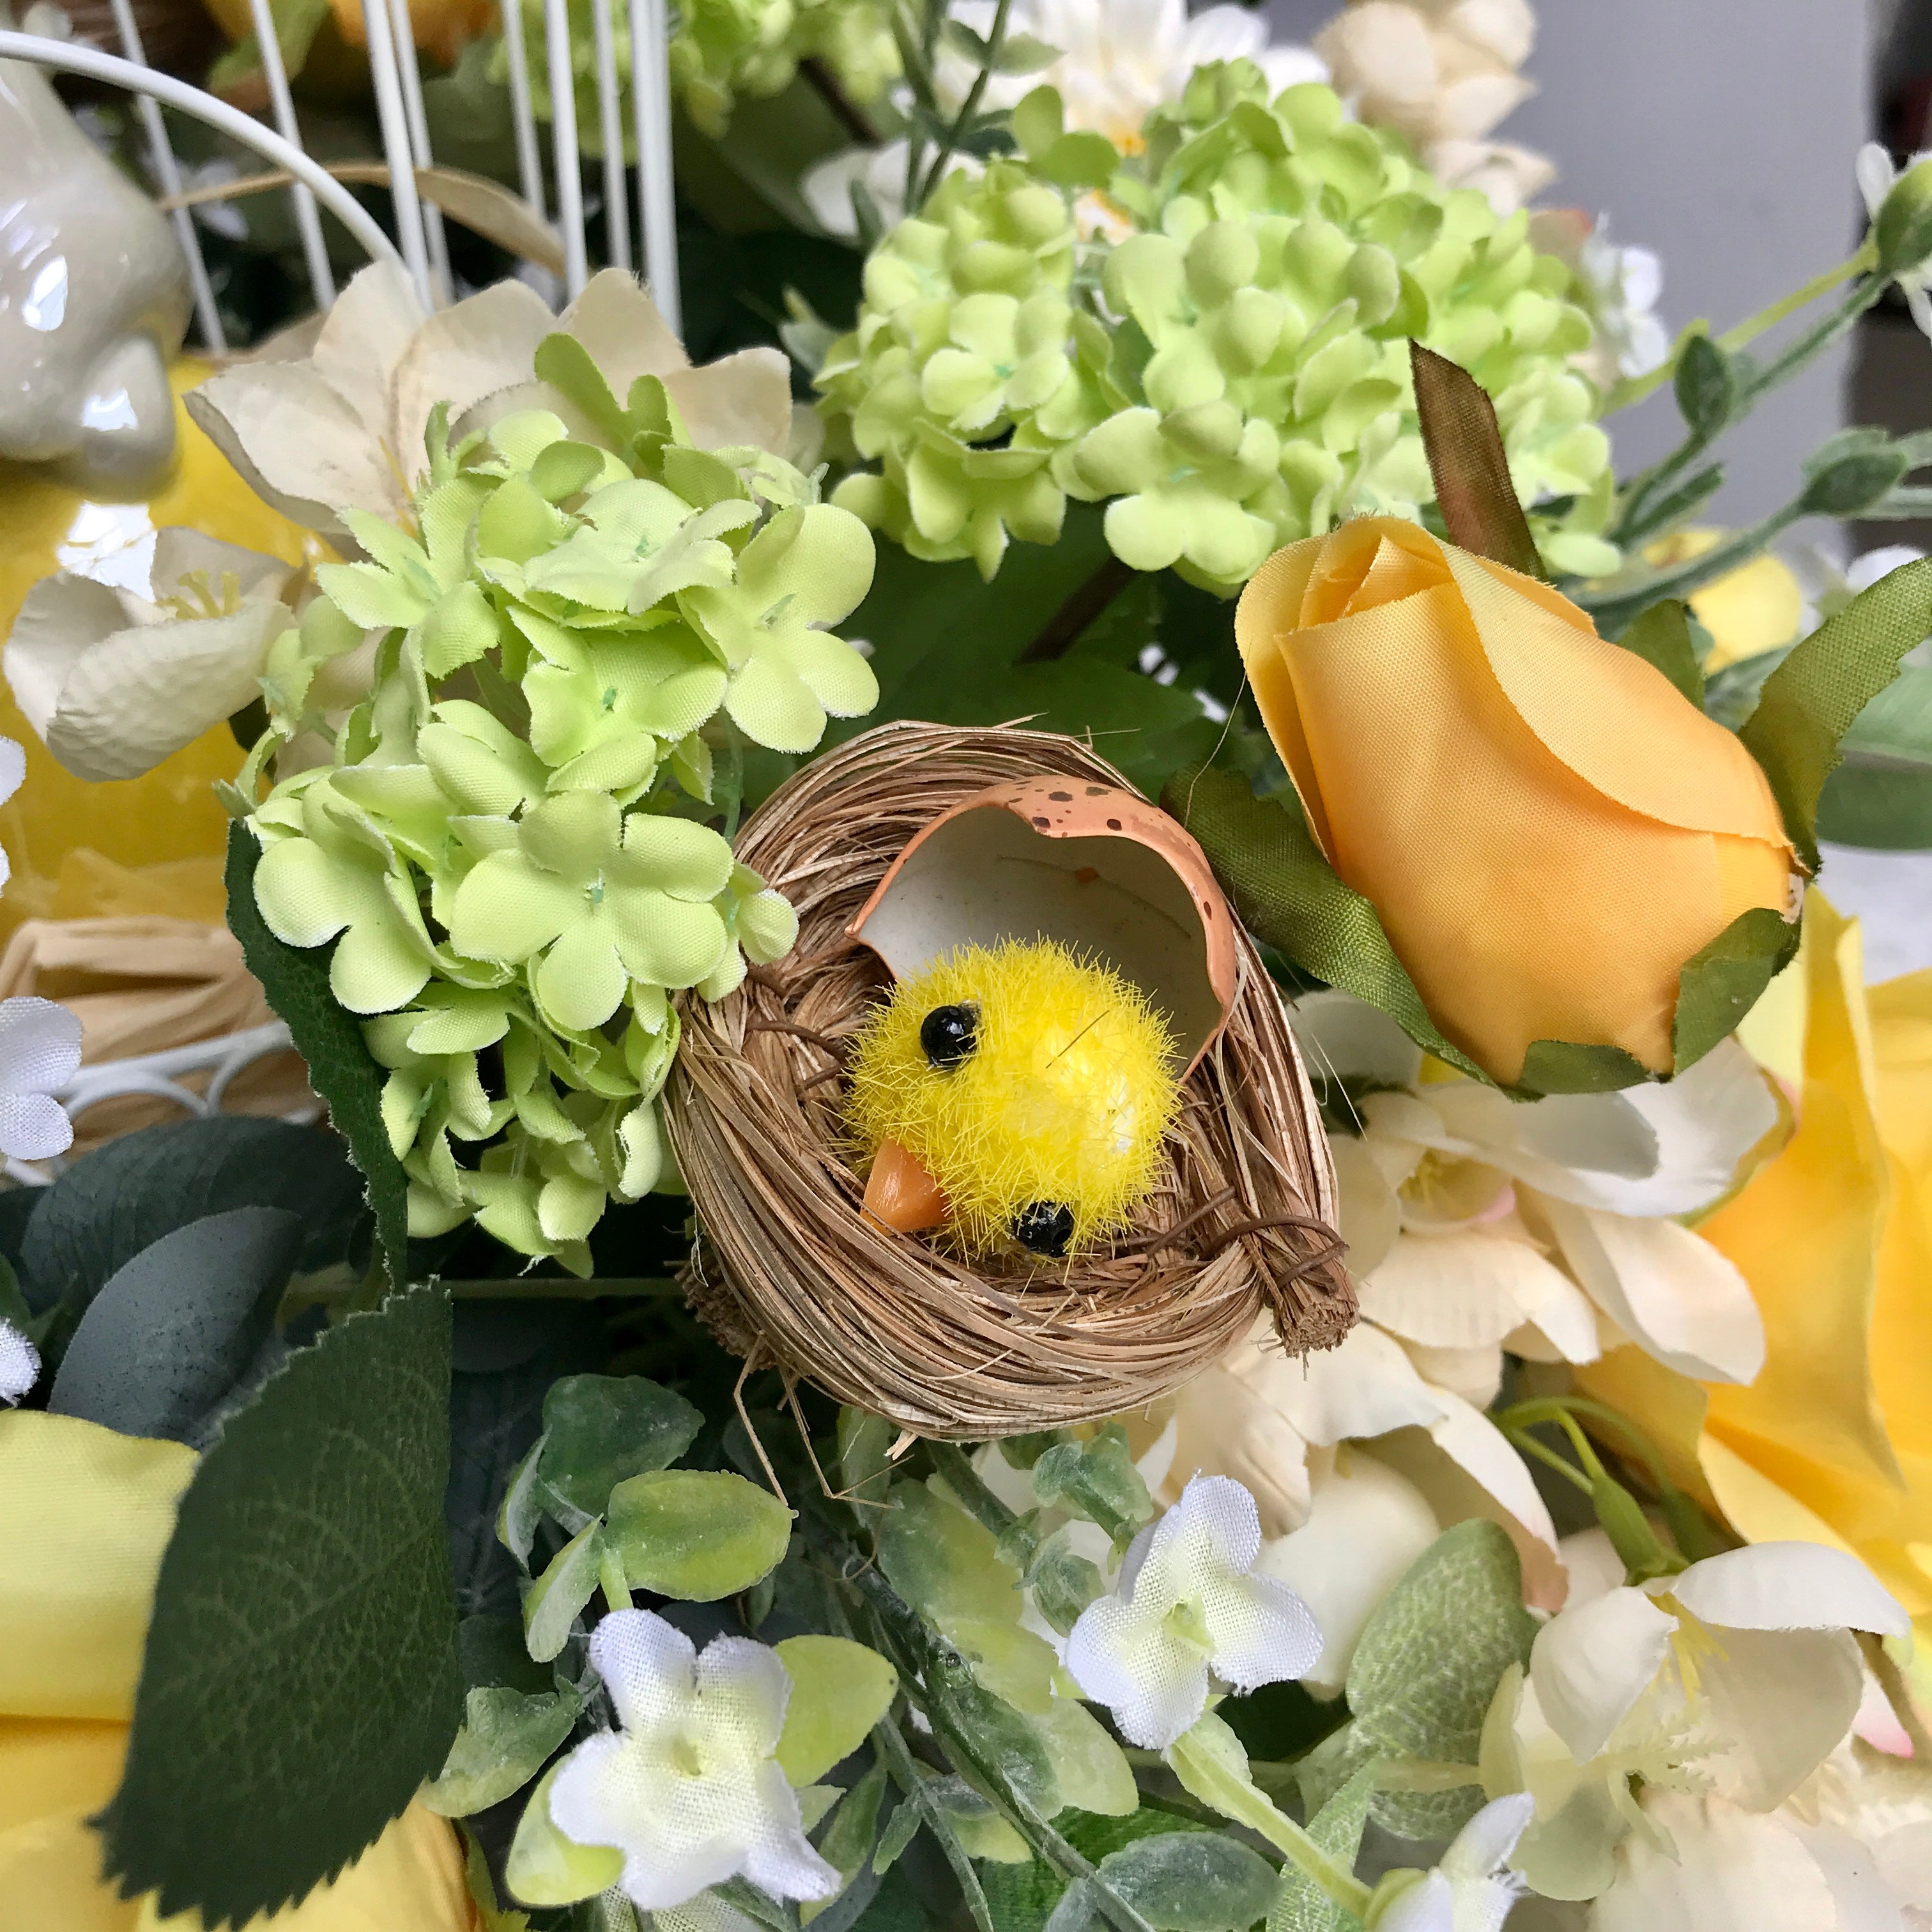 Our Easter Birdcage